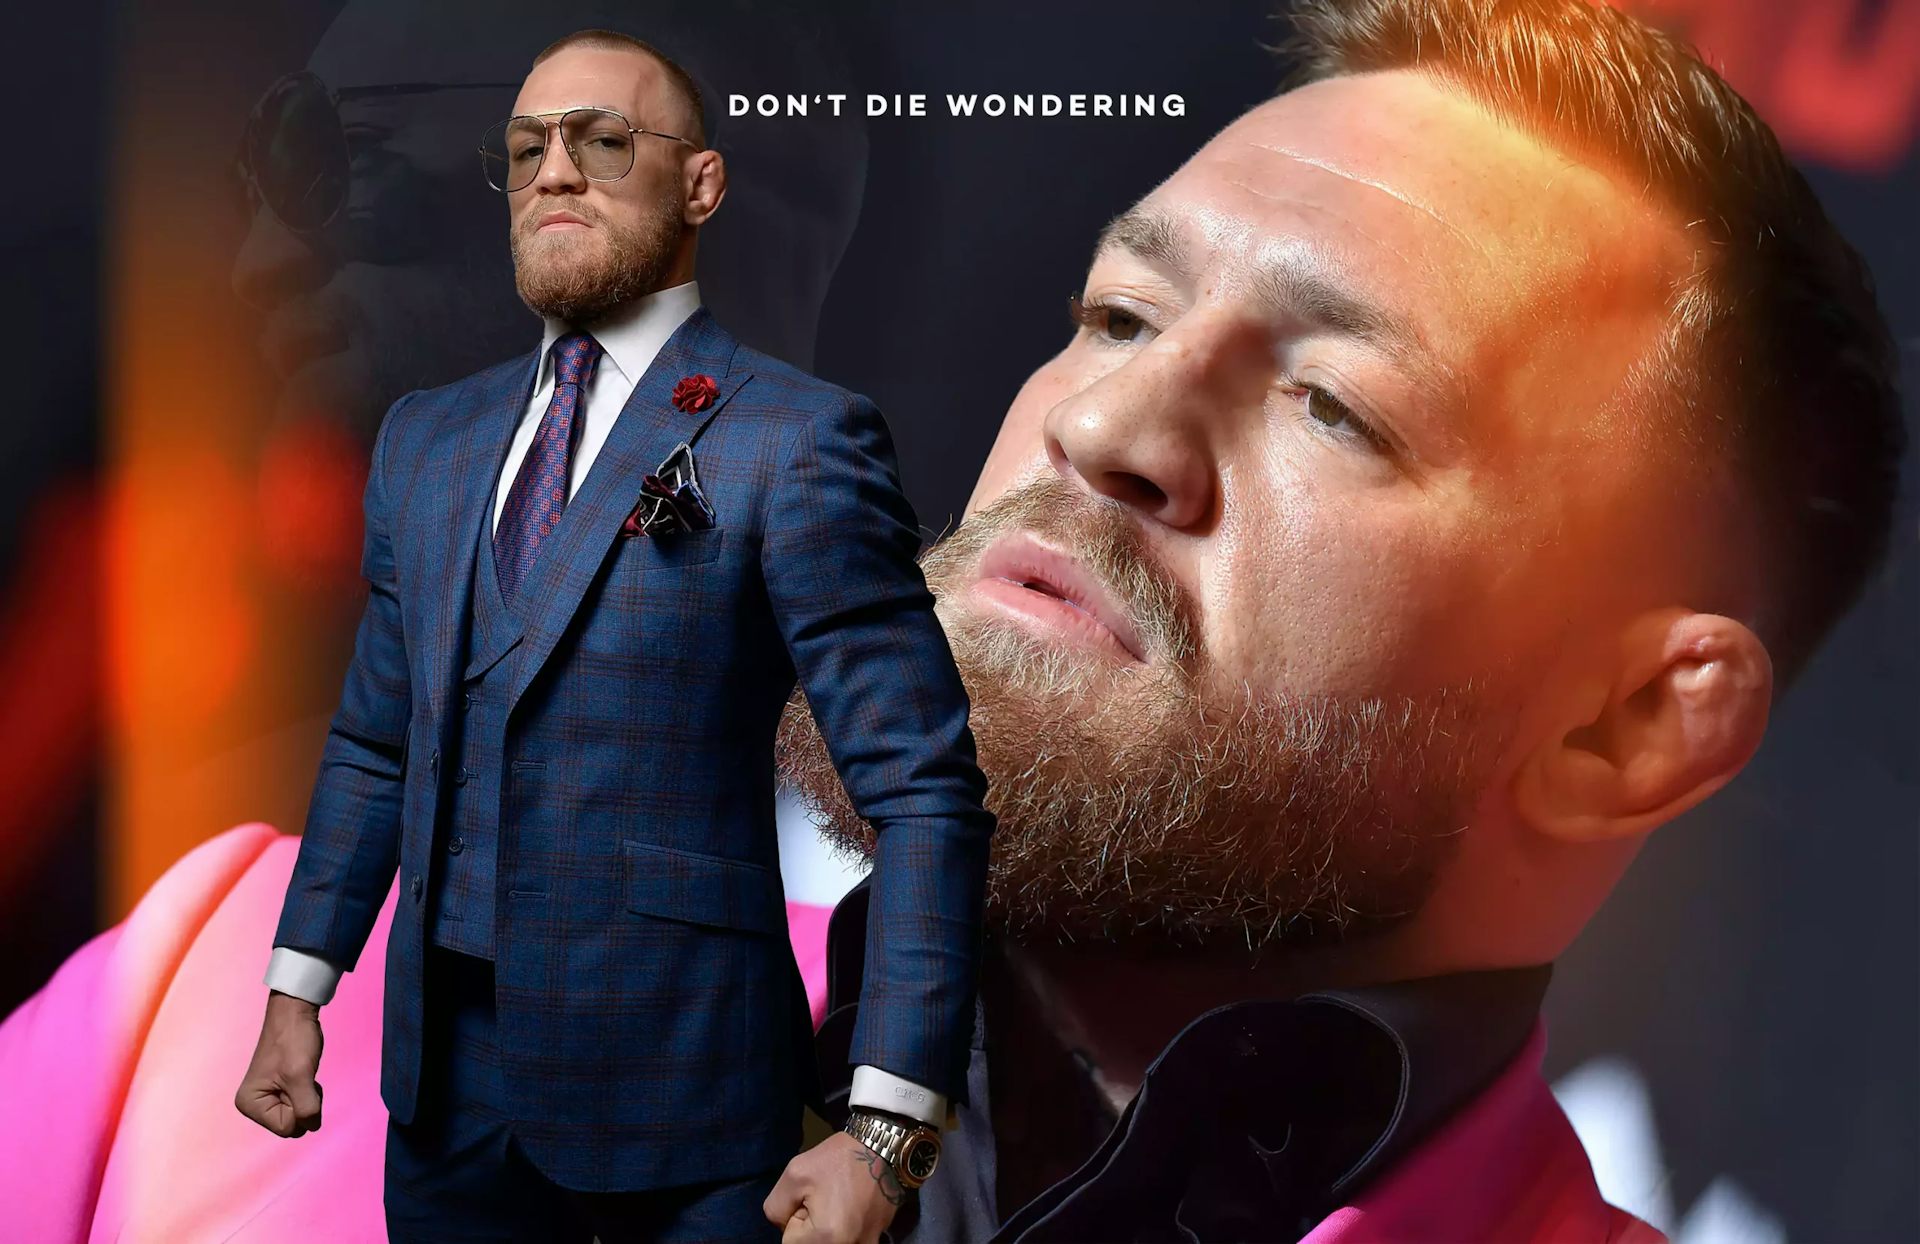 McGregor: Inside the luxurious lifestyle of one of the world’s highest-paid athletes